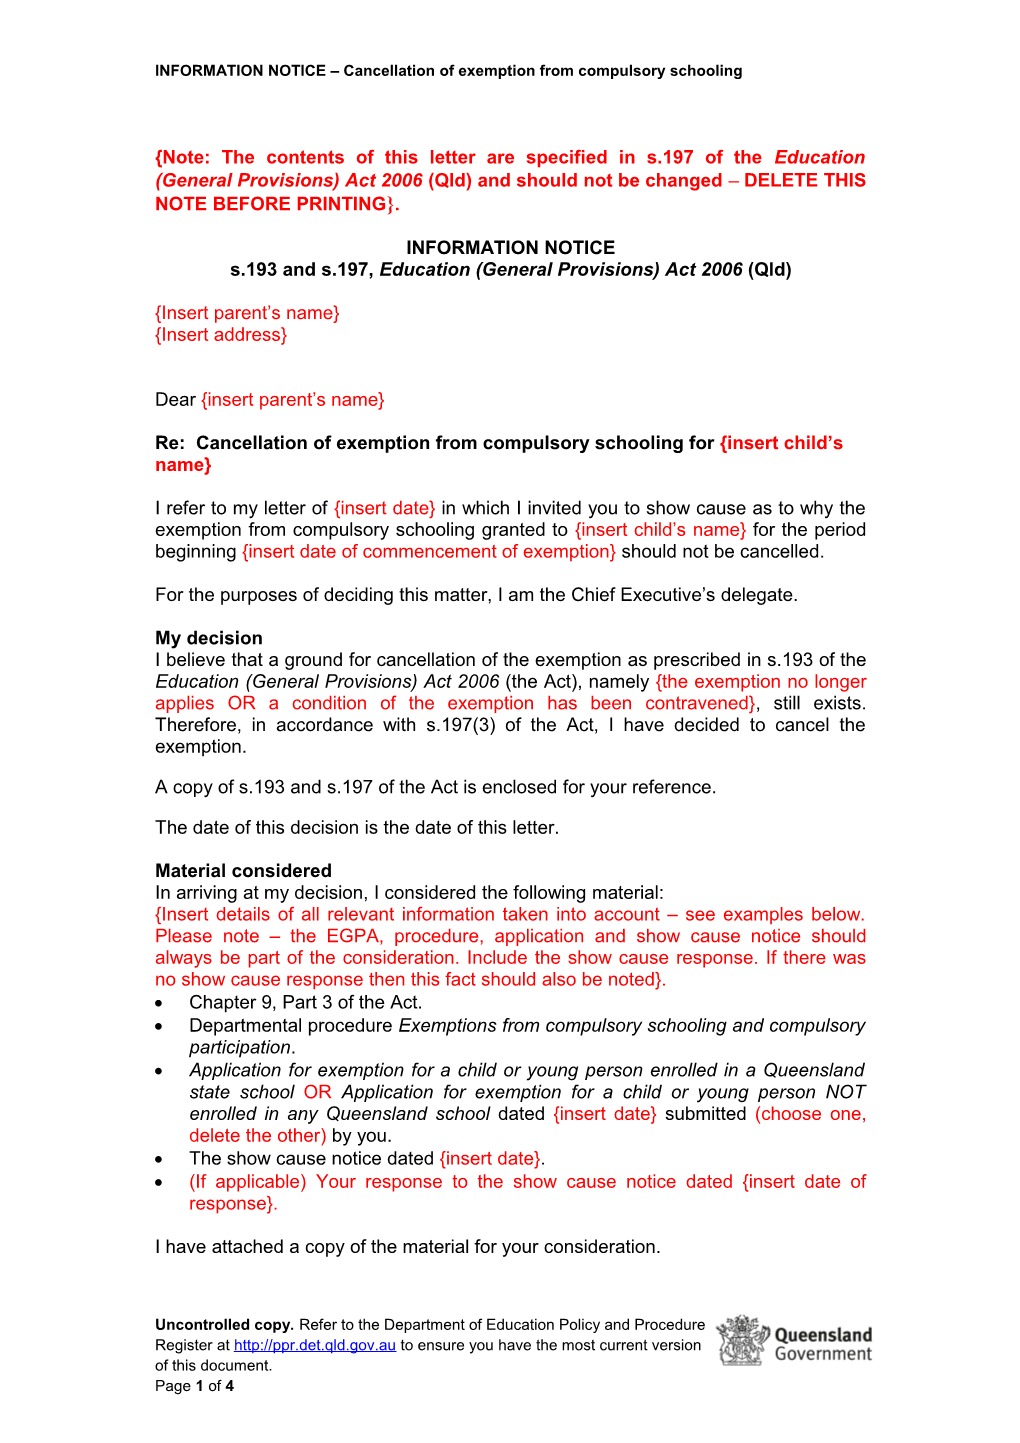 Information Notice Cancelling Exemption from Compulsory Schooling